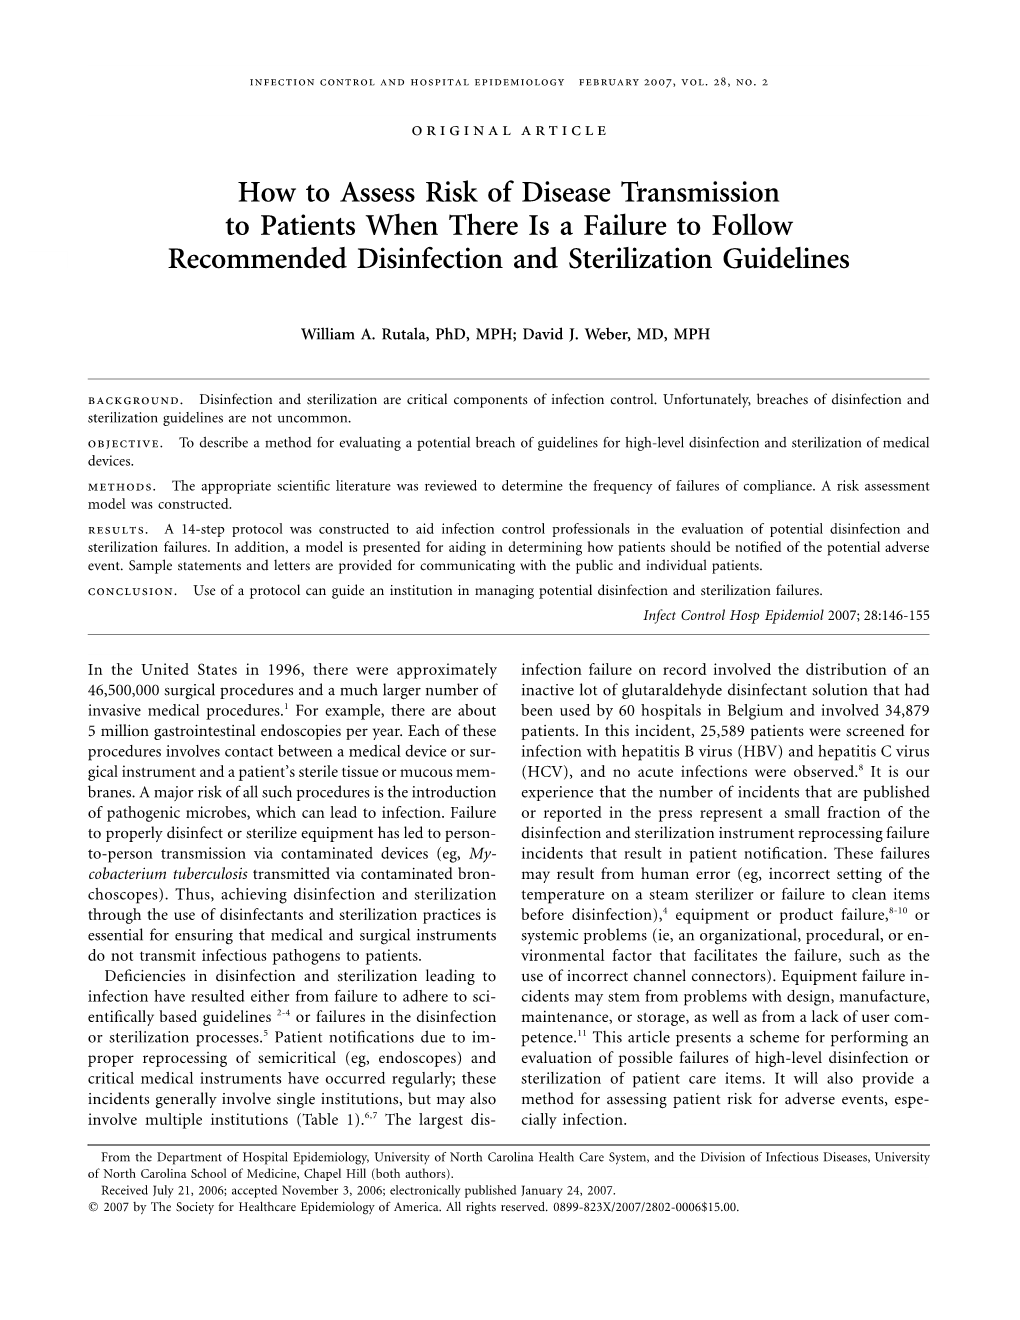 How to Assess Risk of Disease Transmission to Patients When There Is a Failure to Follow Recommended Disinfection and Sterilization Guidelines